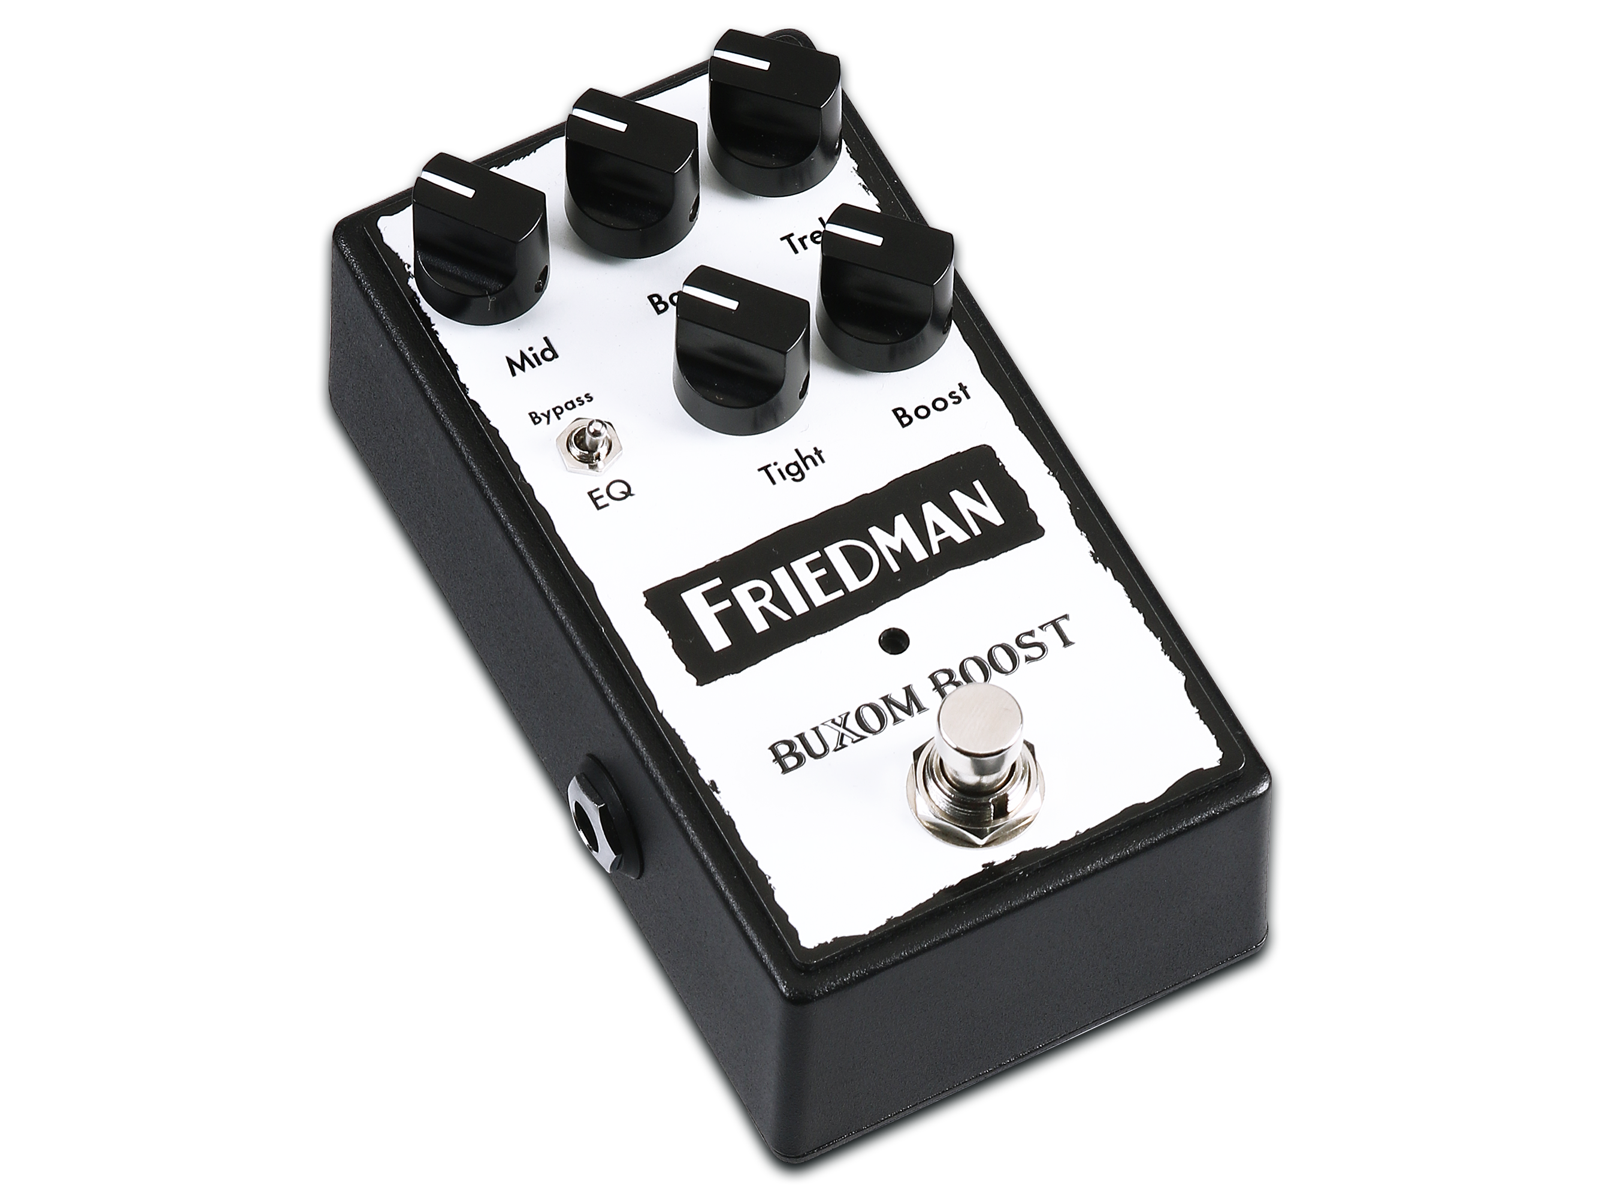 Friedman Amplification Buxom Boost - Volume, boost & expression effect pedal - Variation 1